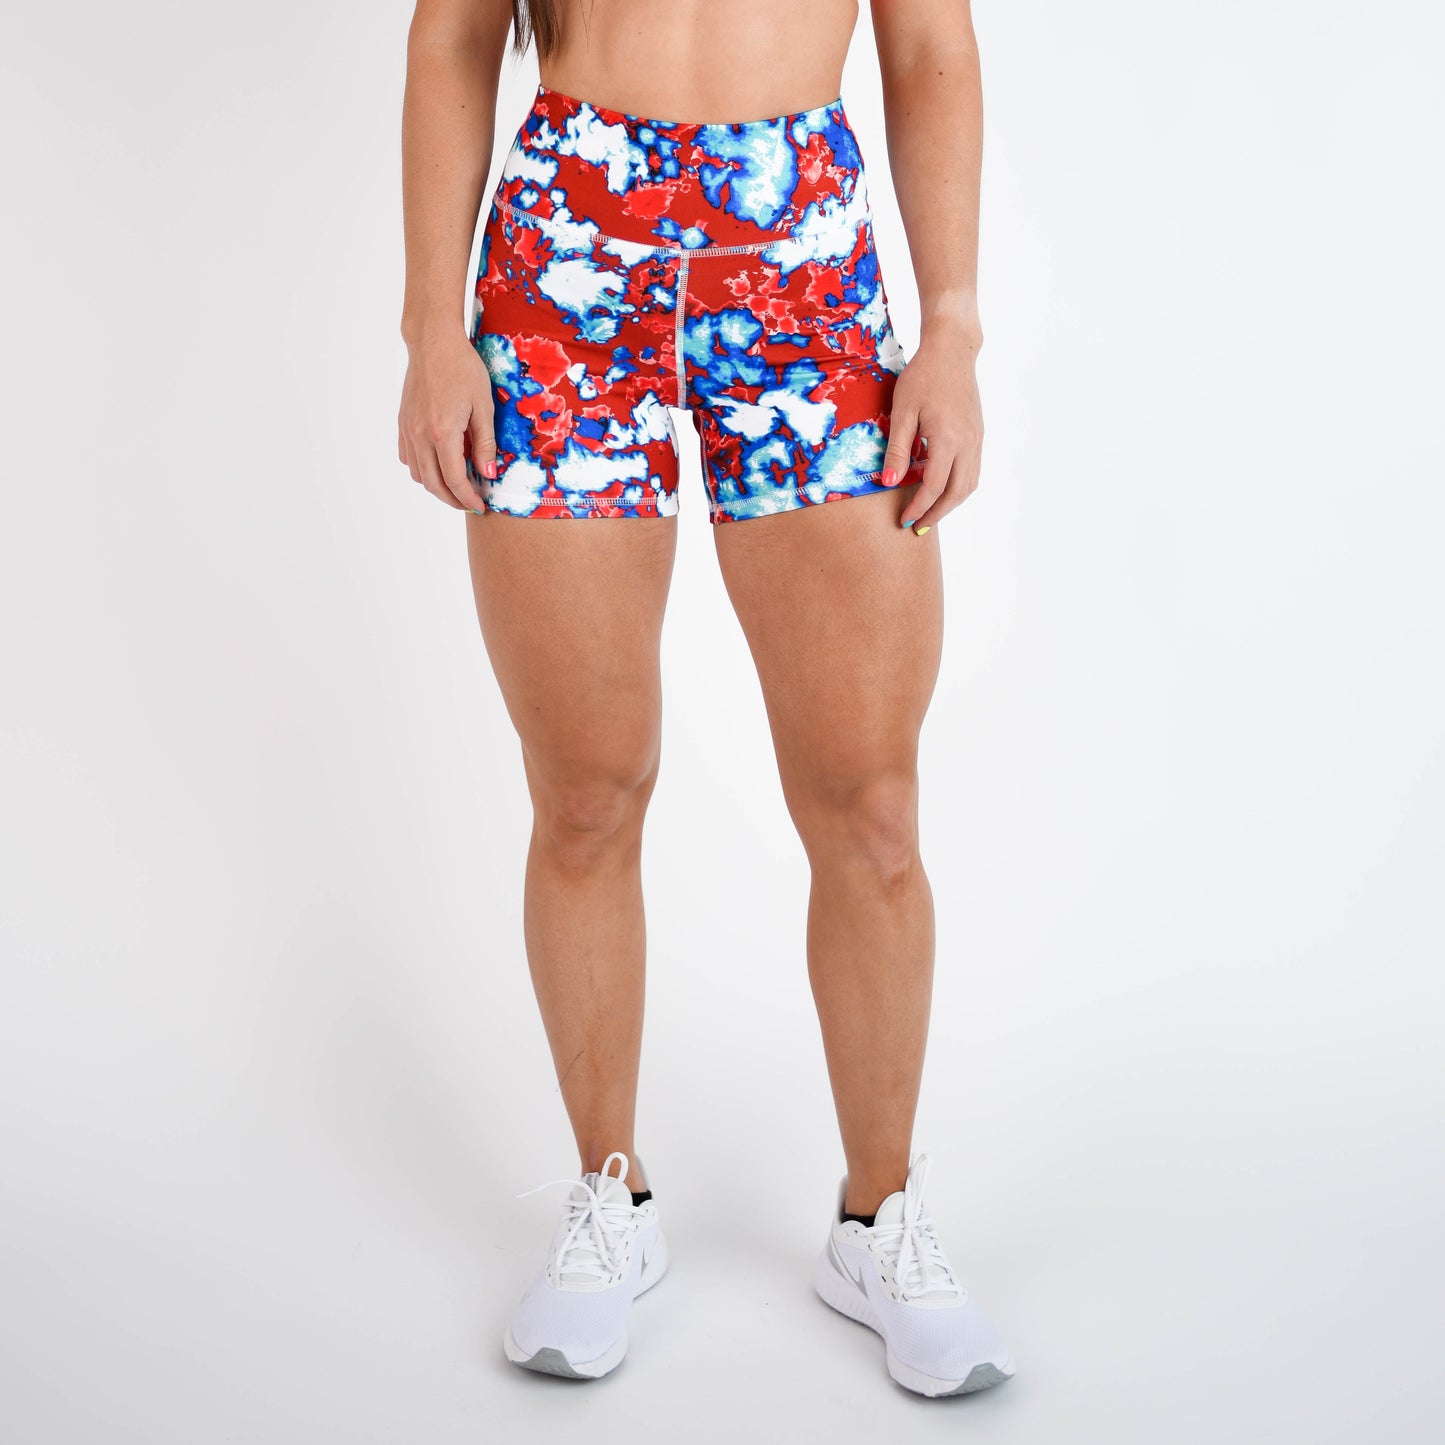 FLEO Red, White and Blue Marble Shorts (True High Contour)